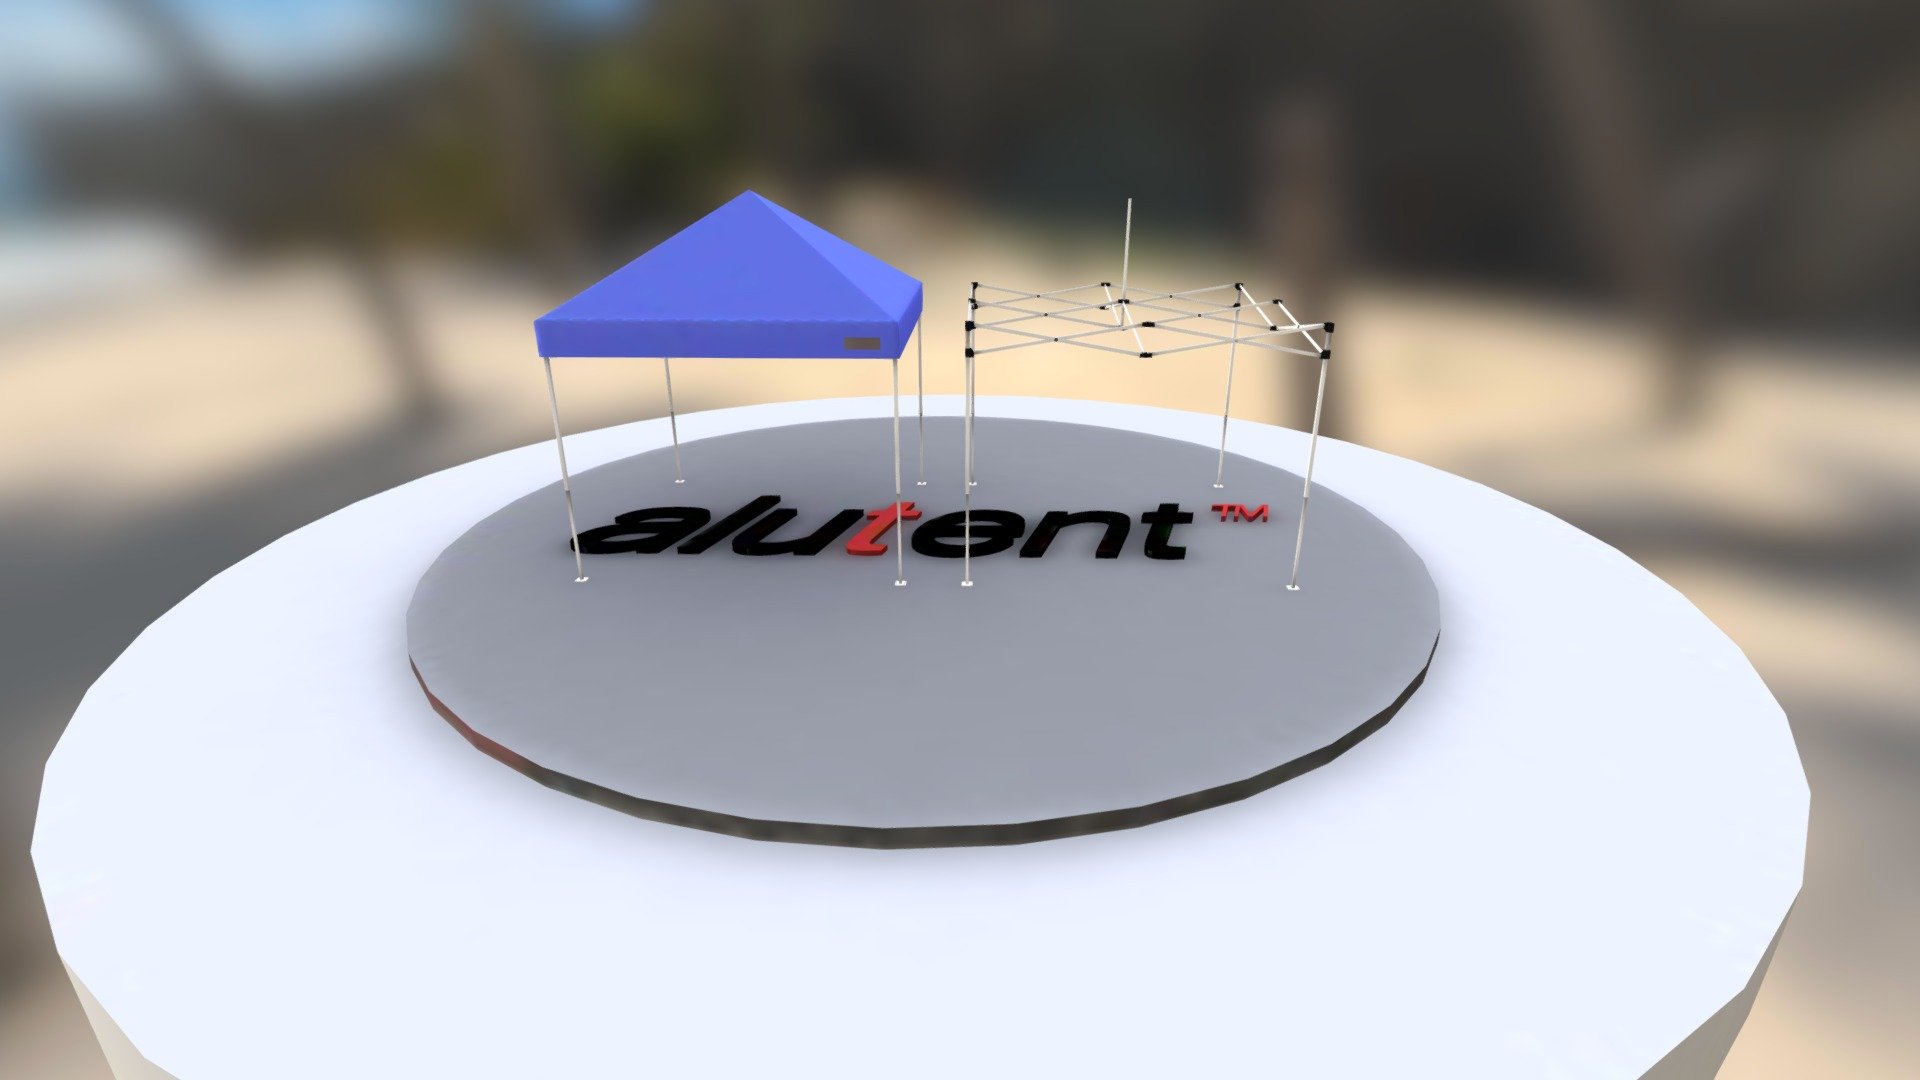 Alutent foldable tent system 3D model
/www.alutent.hu/
Published by 3ds Max - Alutent TM /foldable tent/ - 3D model by zoli075 3d model